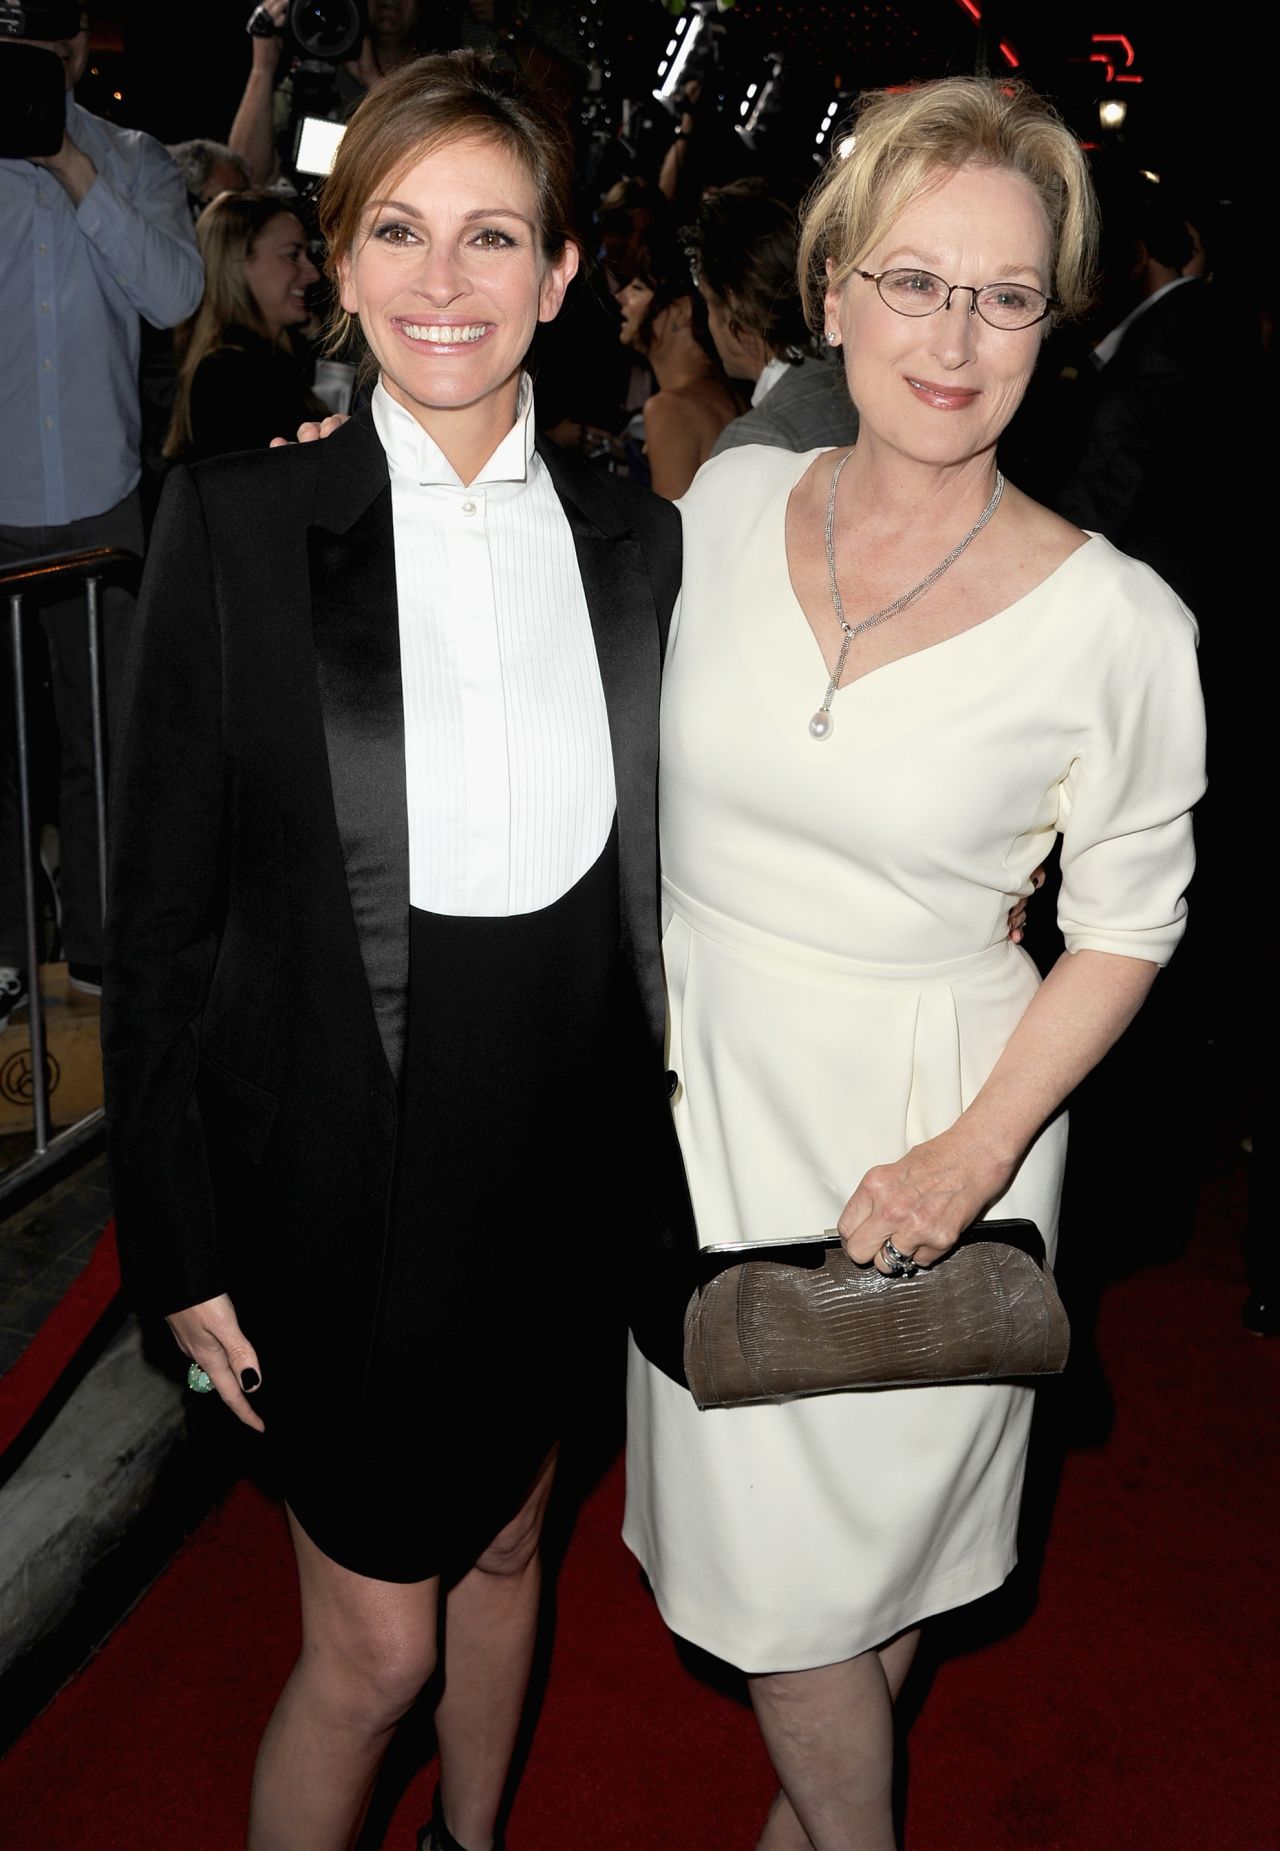 Julia Roberts and Meryl Streep stay by each other's side at the "August: Osage County" premiere in Los Angeles on December 16.